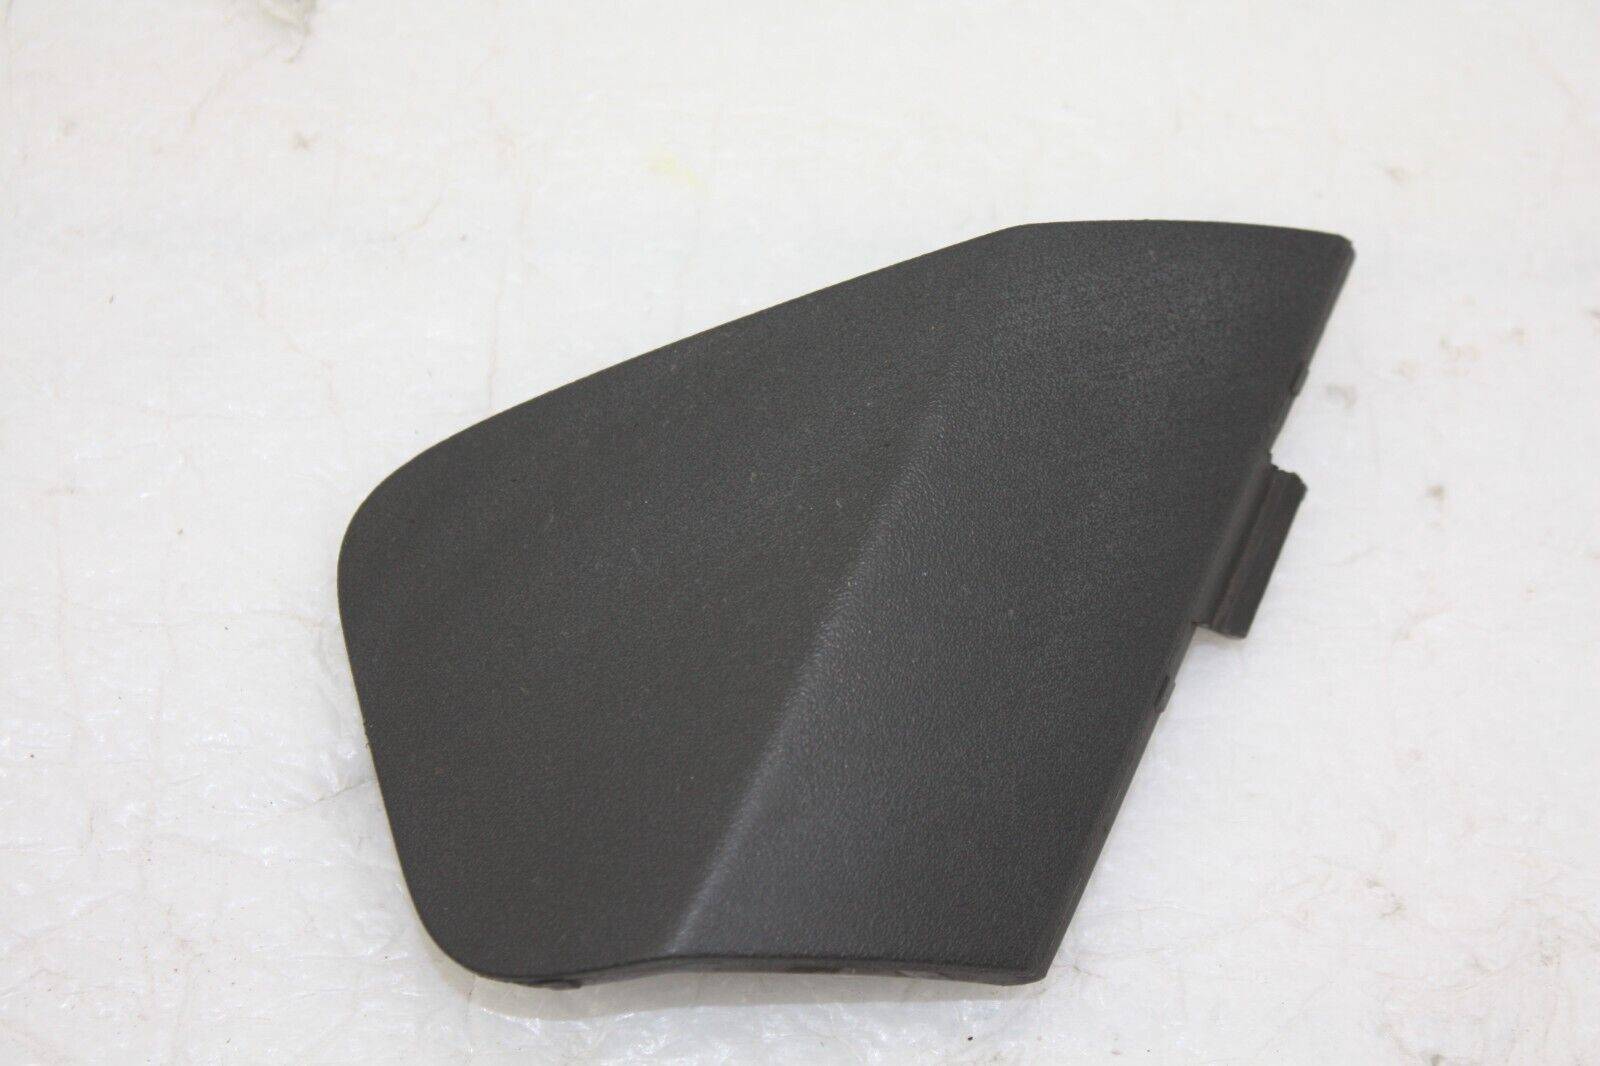 Ford Fiesta Front Bumper Tow Cover 8A61 17A989 A Genuine 176423557906